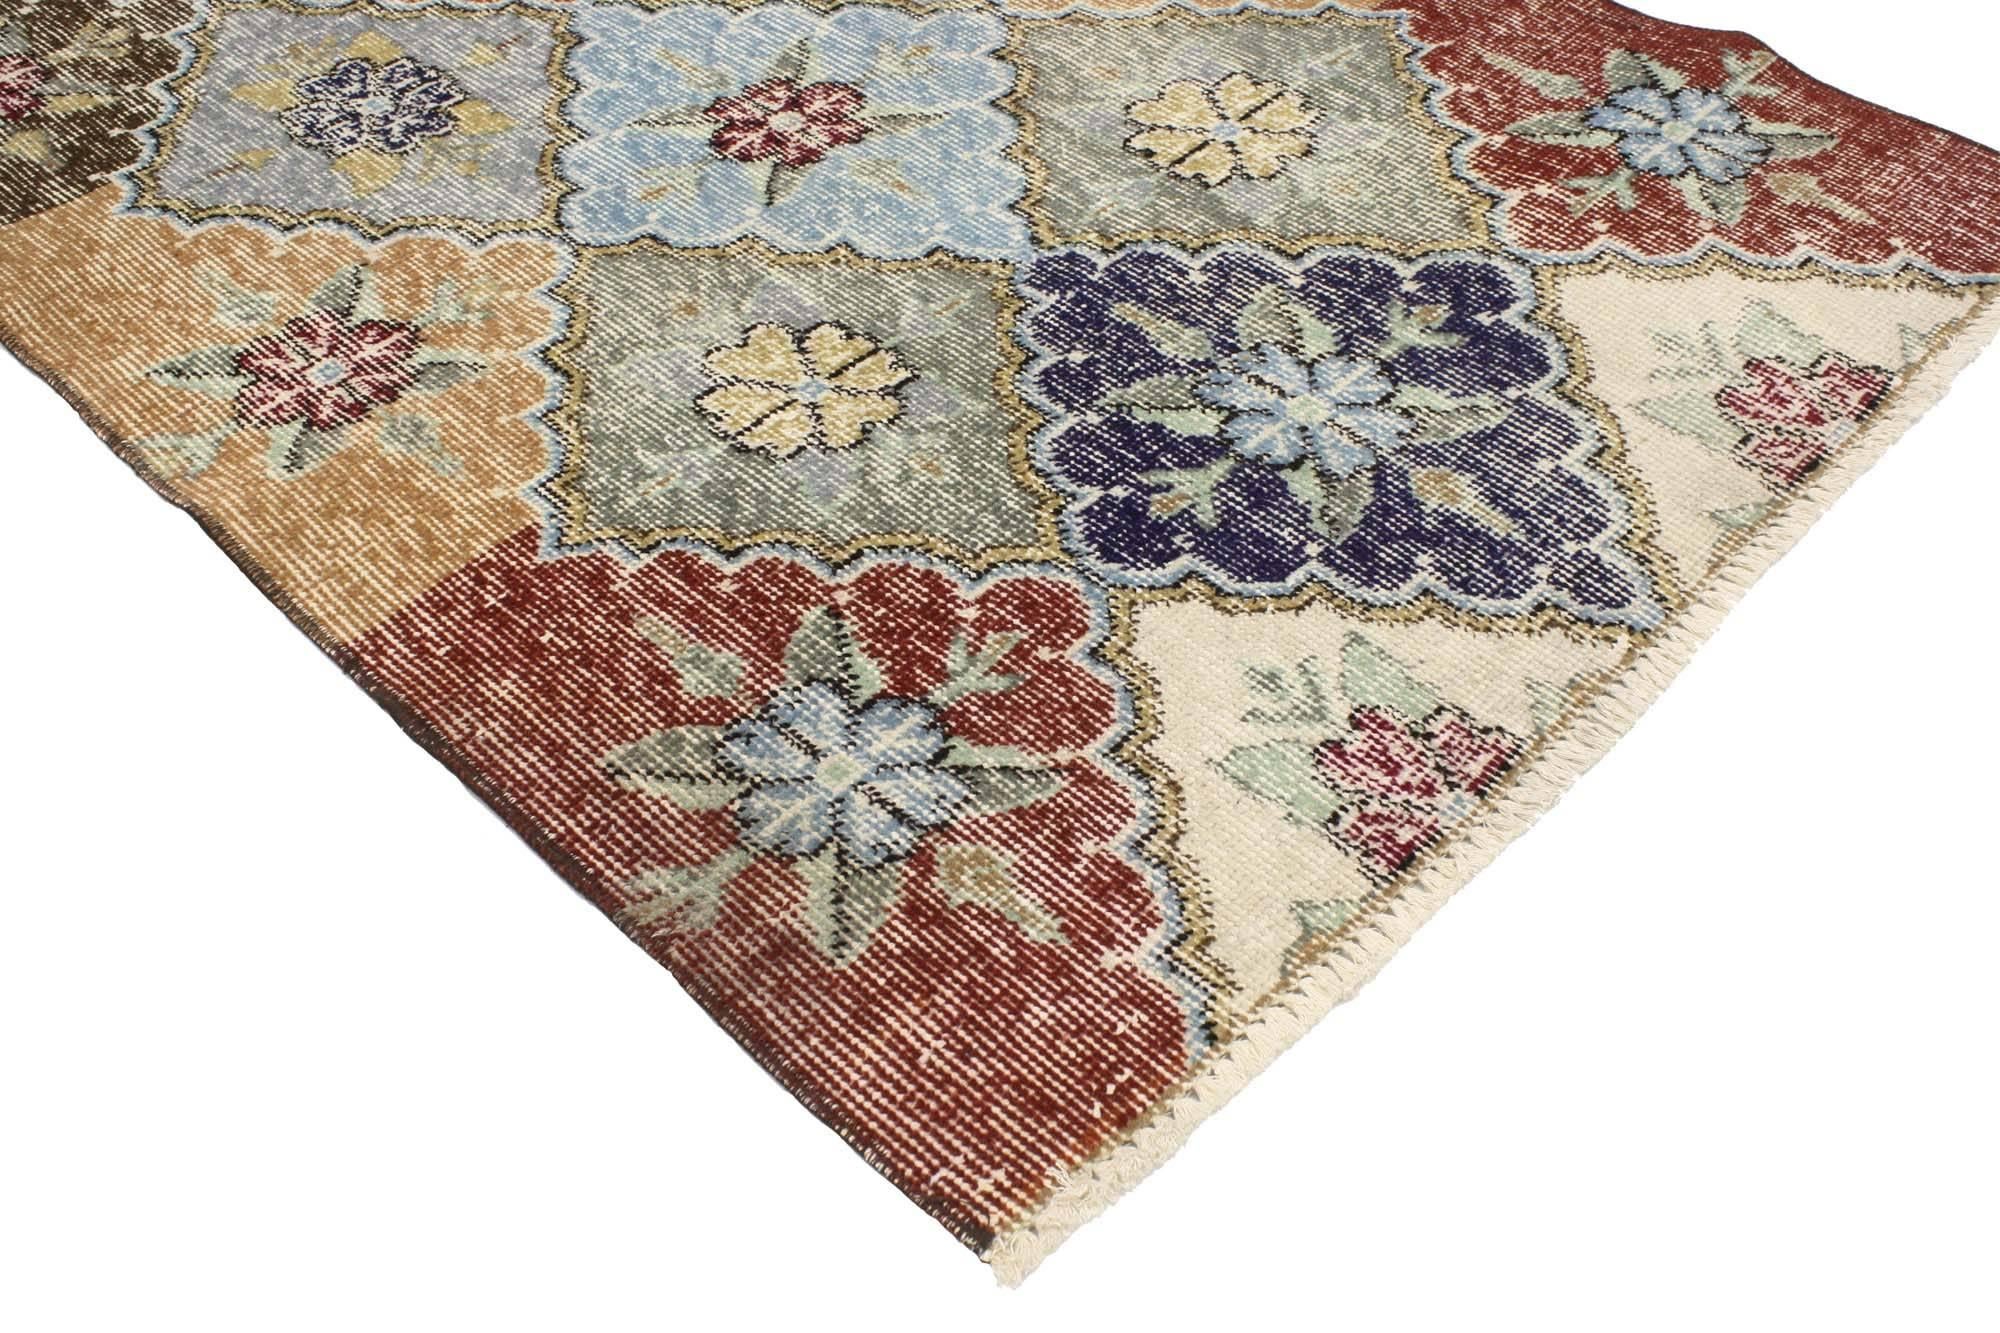 51906 Zeki Muren Distressed Vintage Turkish Sivas Accent Rug with Rustic Arts & Crafts Style 02'09 x 05'07. This hand-knotted wool distressed vintage Sivas rug features a floral lattice pattern composed of scalloped diamonds in alternating colors.